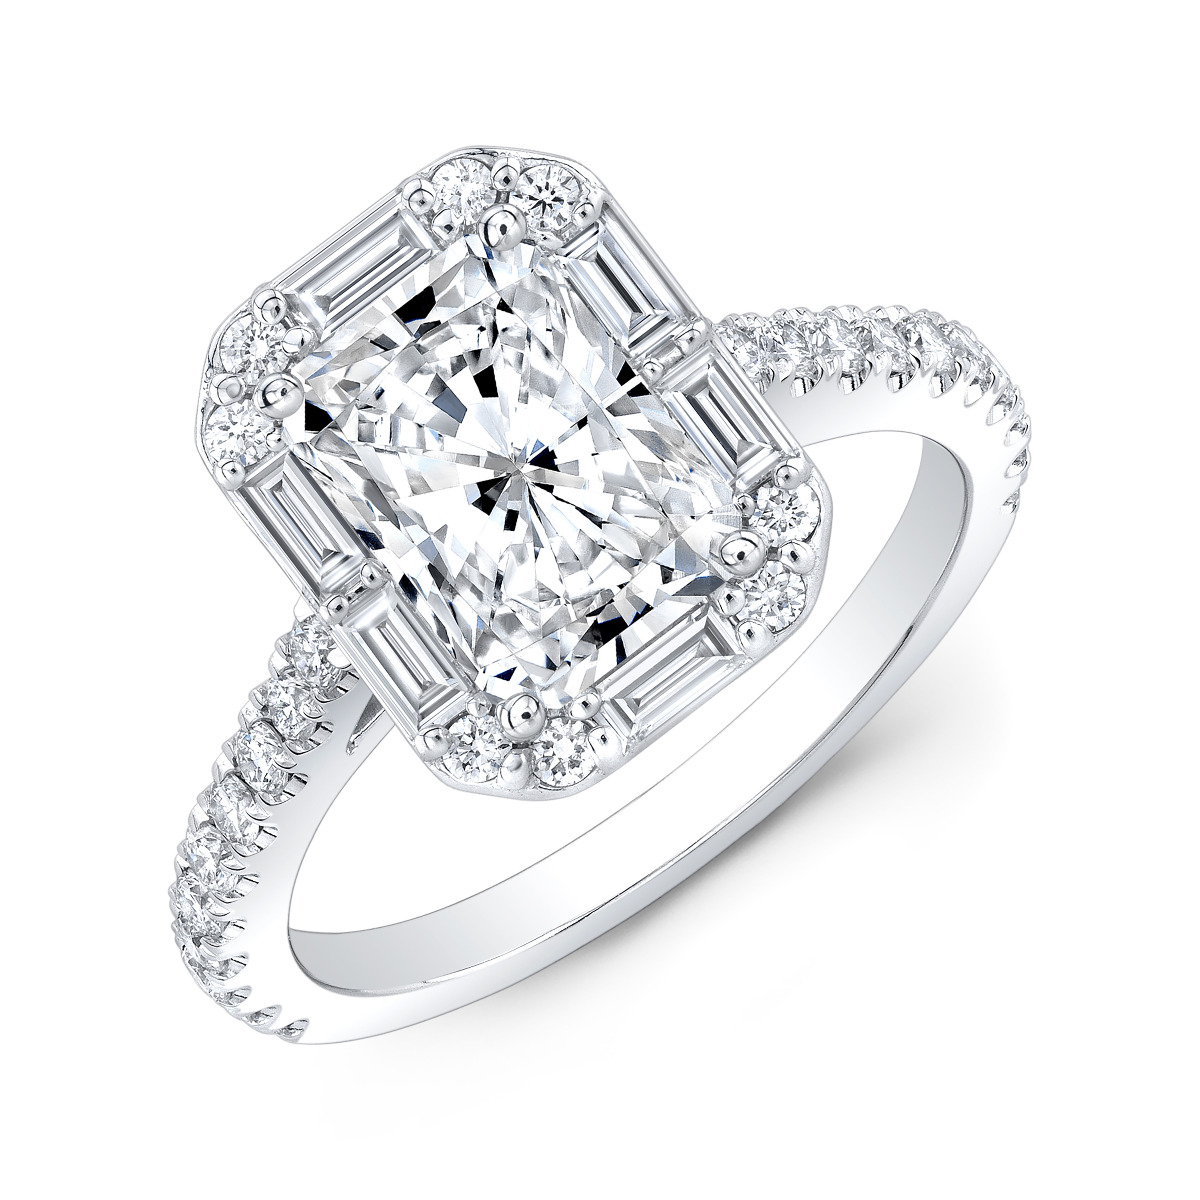 This engagement ring features stunning Baguette and Pave Diamonds on the halo setting.  